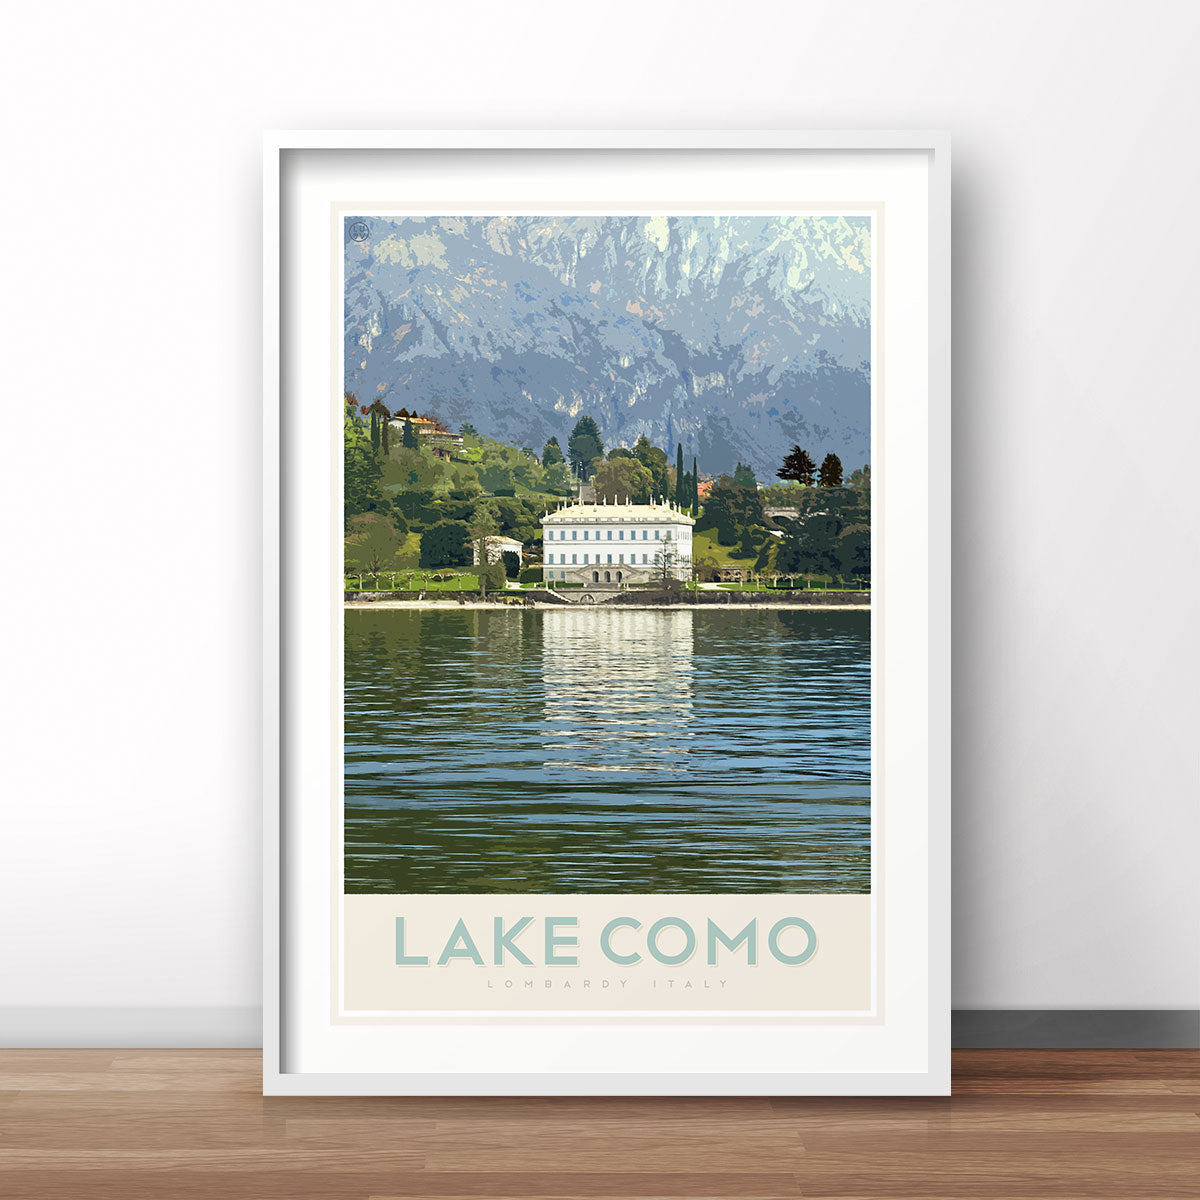 Lake Como Italy, vintage travel style print by places we luv